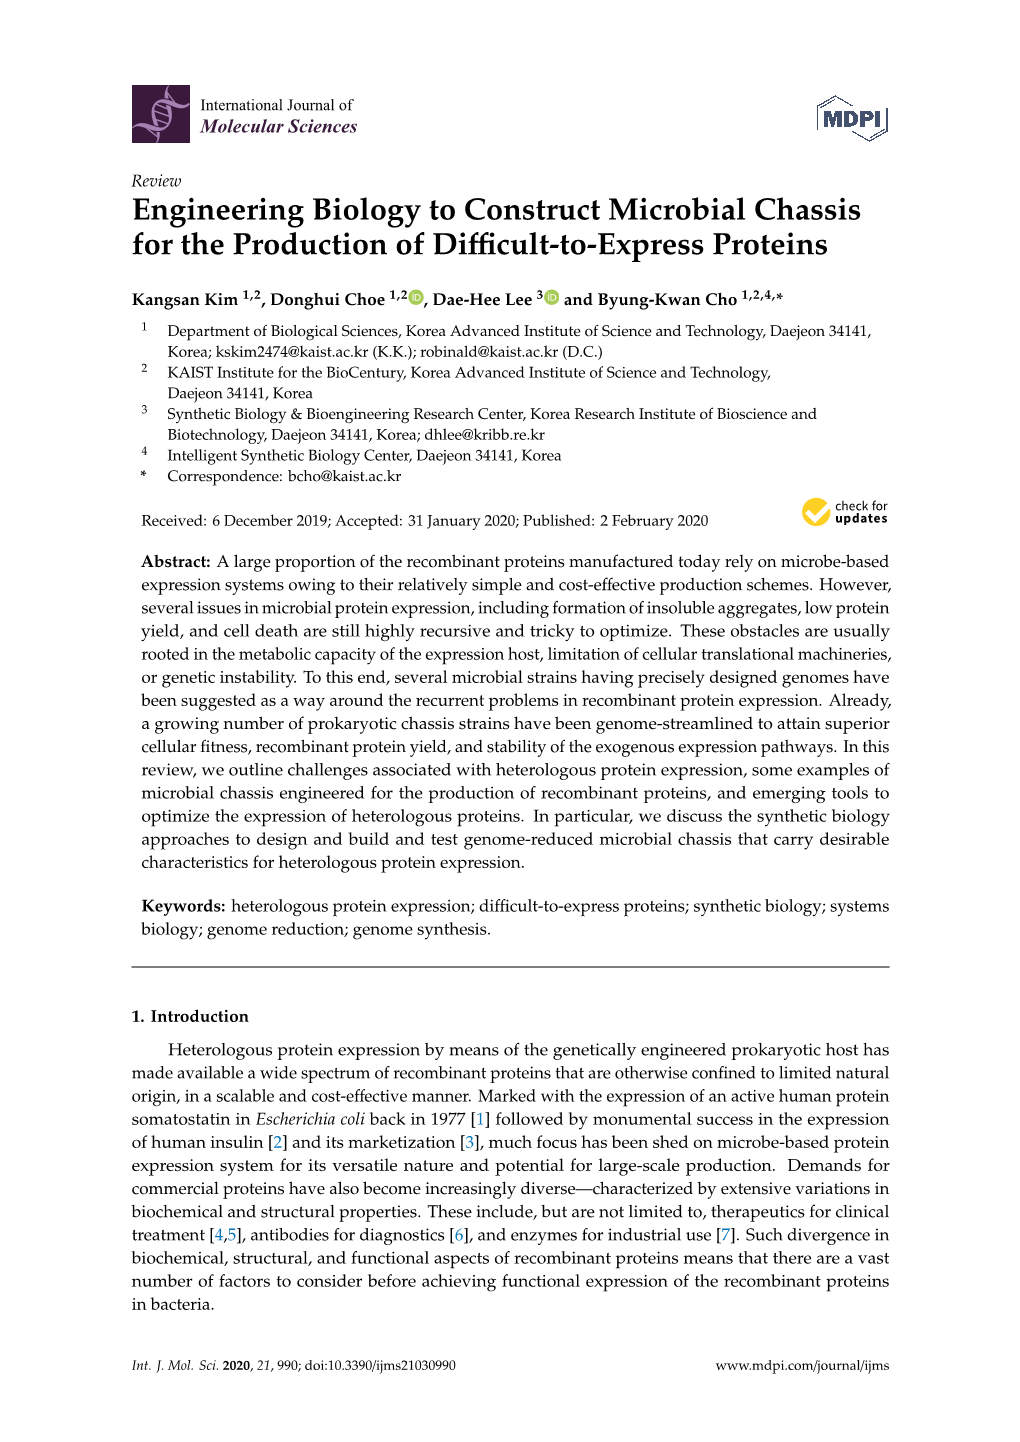 Engineering Biology to Construct Microbial Chassis for the Production of Diﬃcult-To-Express Proteins